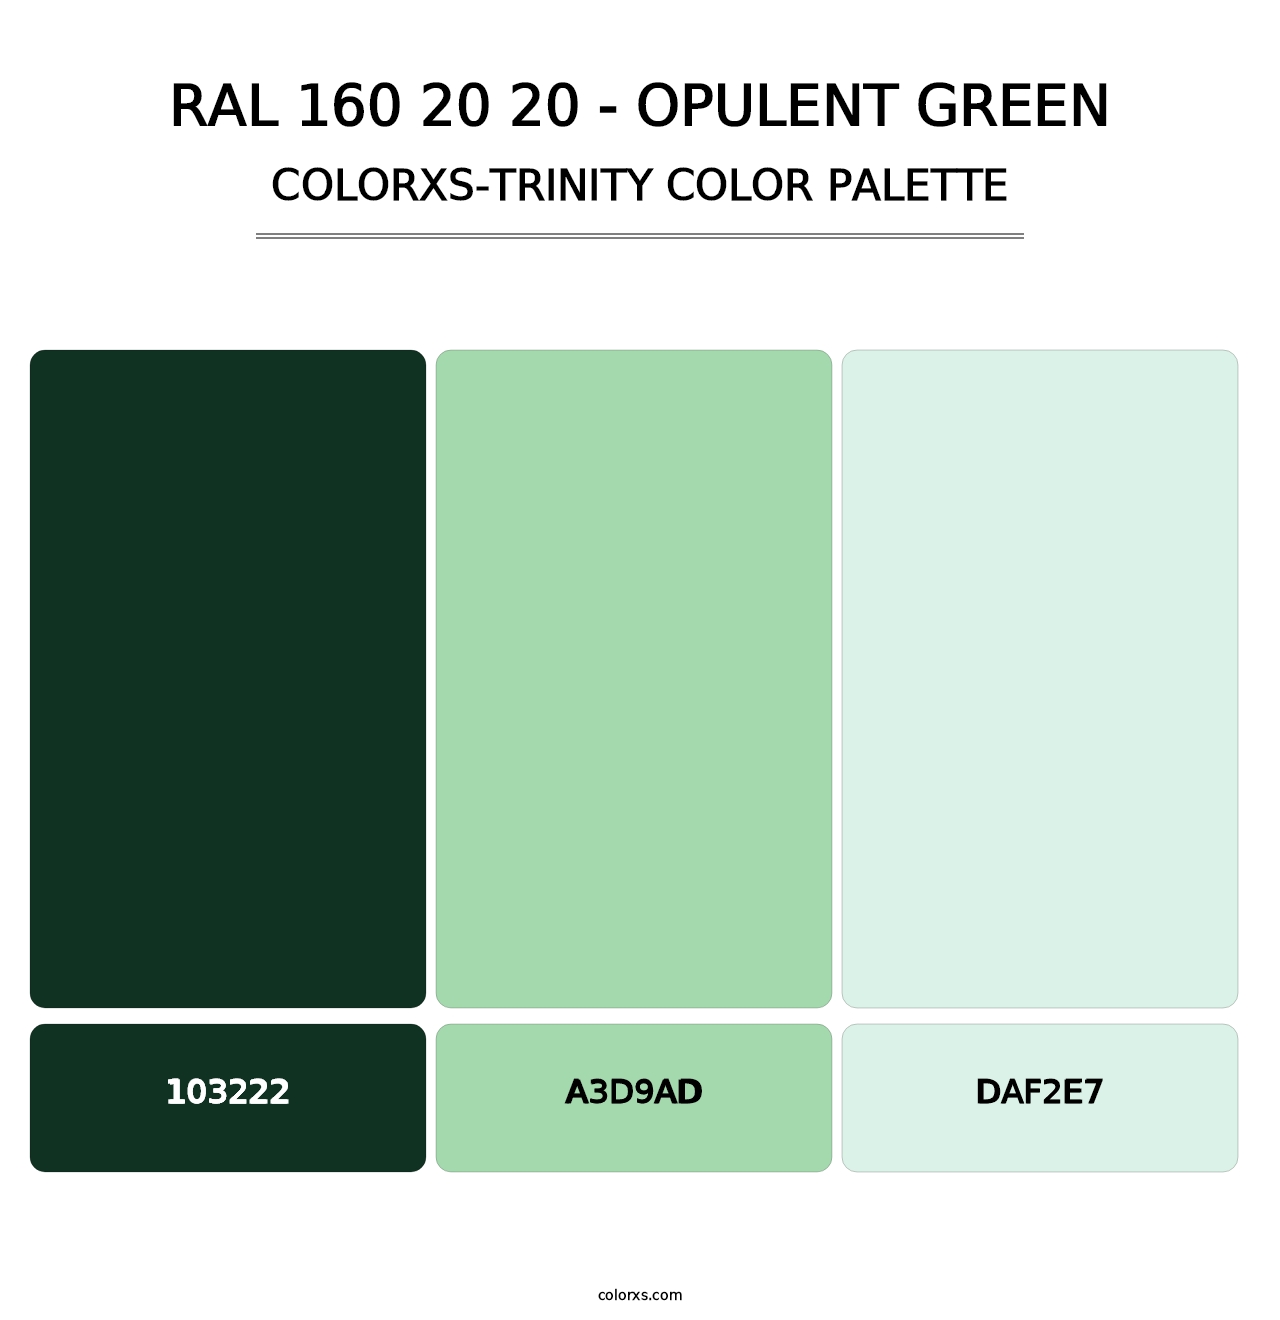 RAL 160 20 20 - Opulent Green - Colorxs Trinity Palette